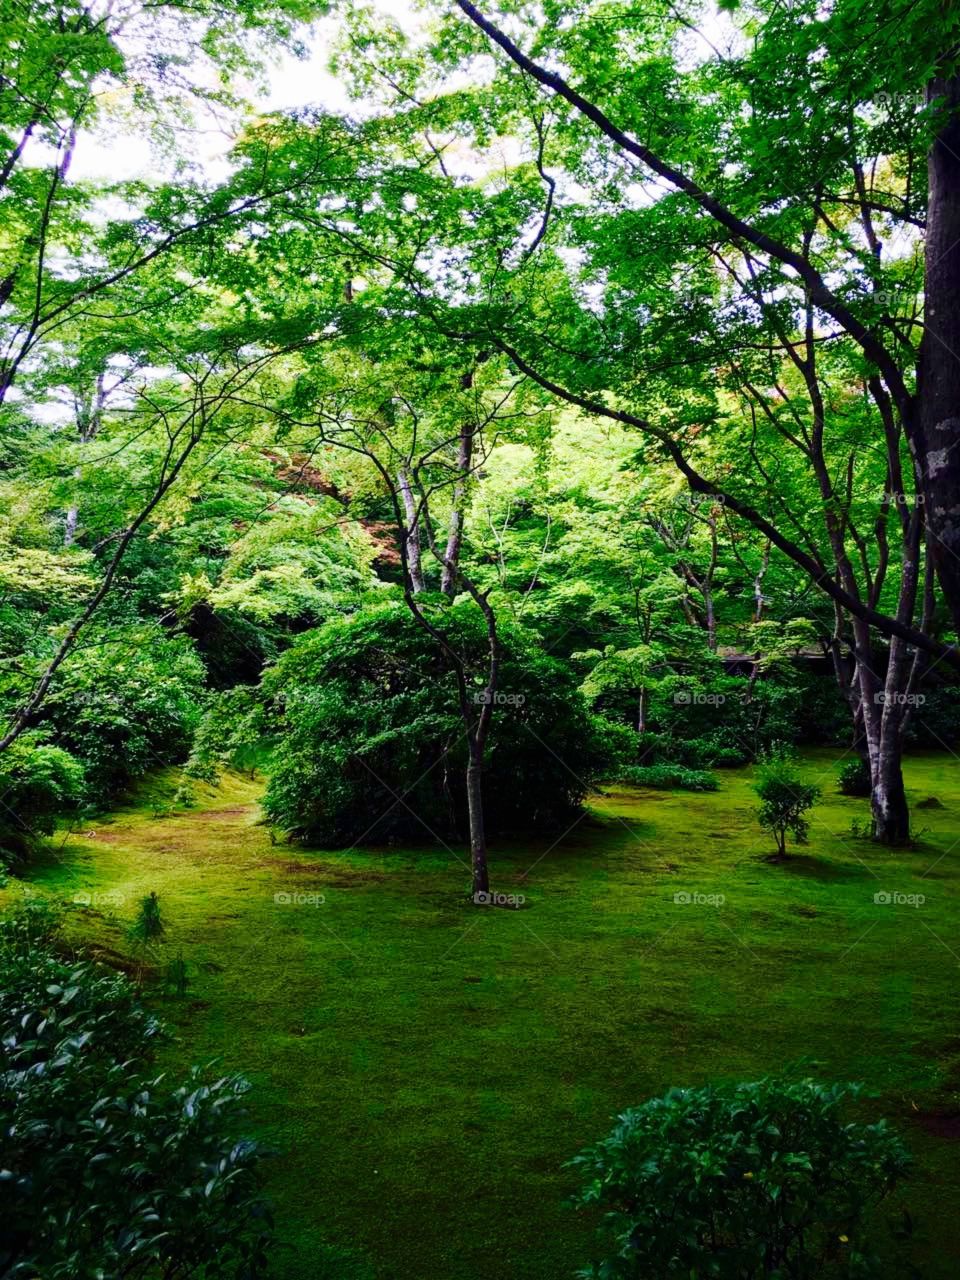 a japanese garden with well pruned plants and trees